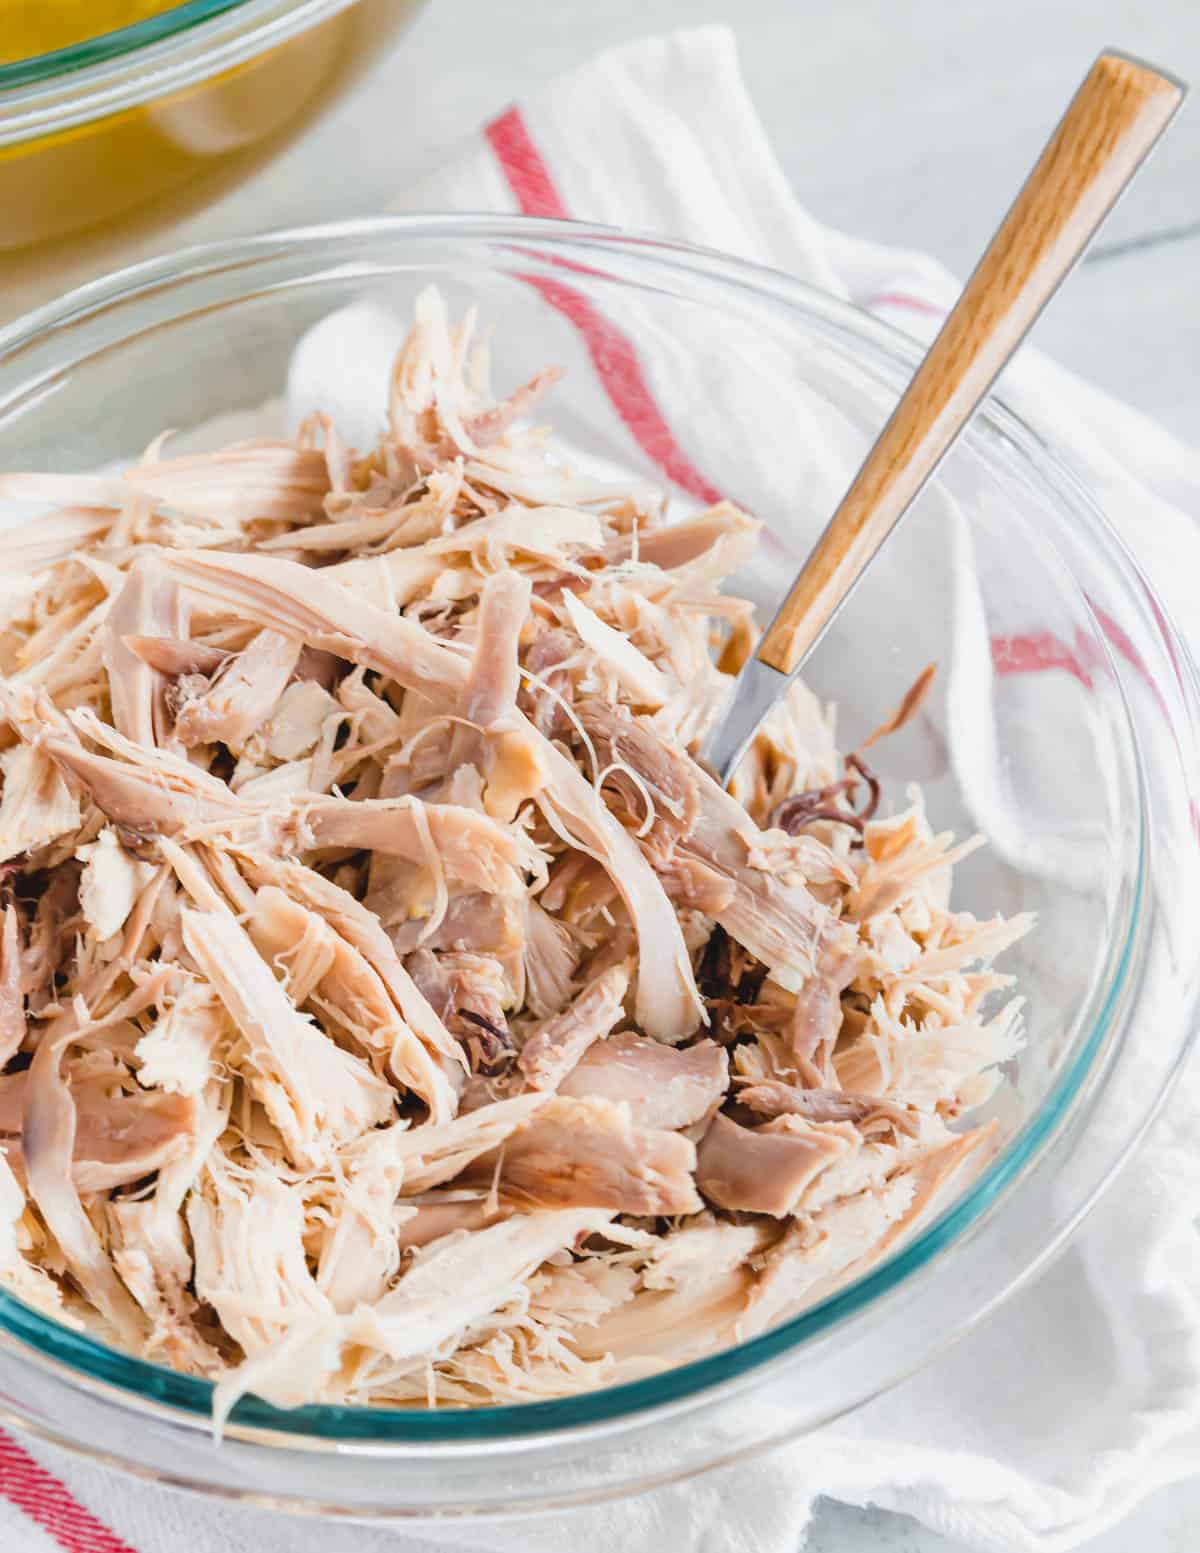 Stewing hen meat cooked in an Instant Pot shredded in a glass bowl.